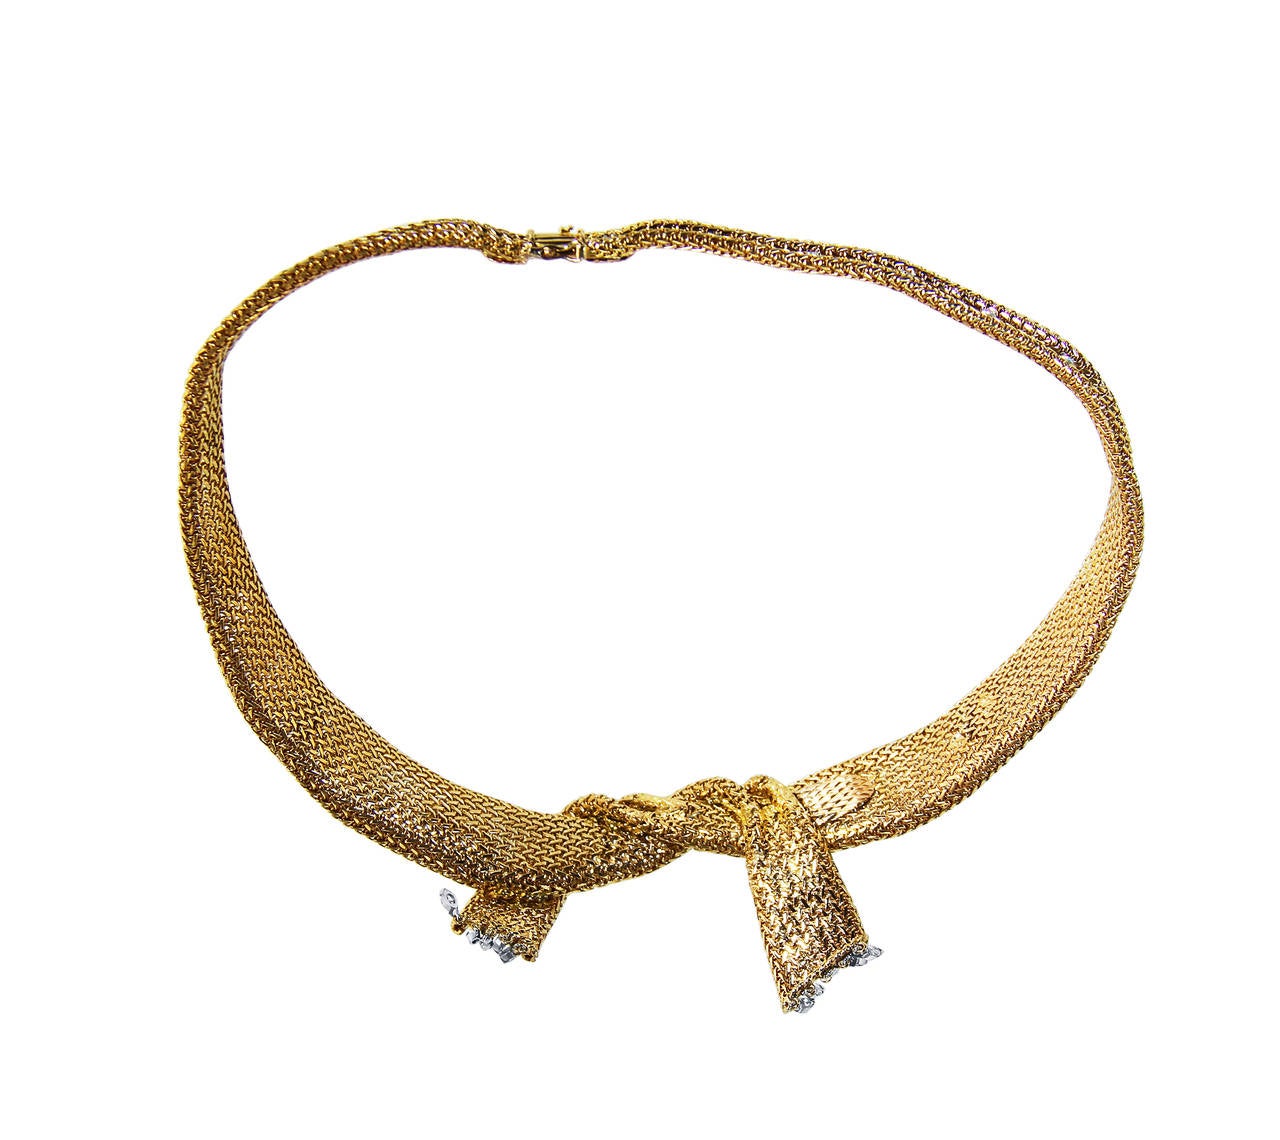 An 18 karat yellow gold and diamond collar necklace, circa 1950, France, the tapered collar designed as a golden mesh ribbon tied at the front, set throughout with 95 round diamonds weighing approximately 4.00 carats, accented by an articulated